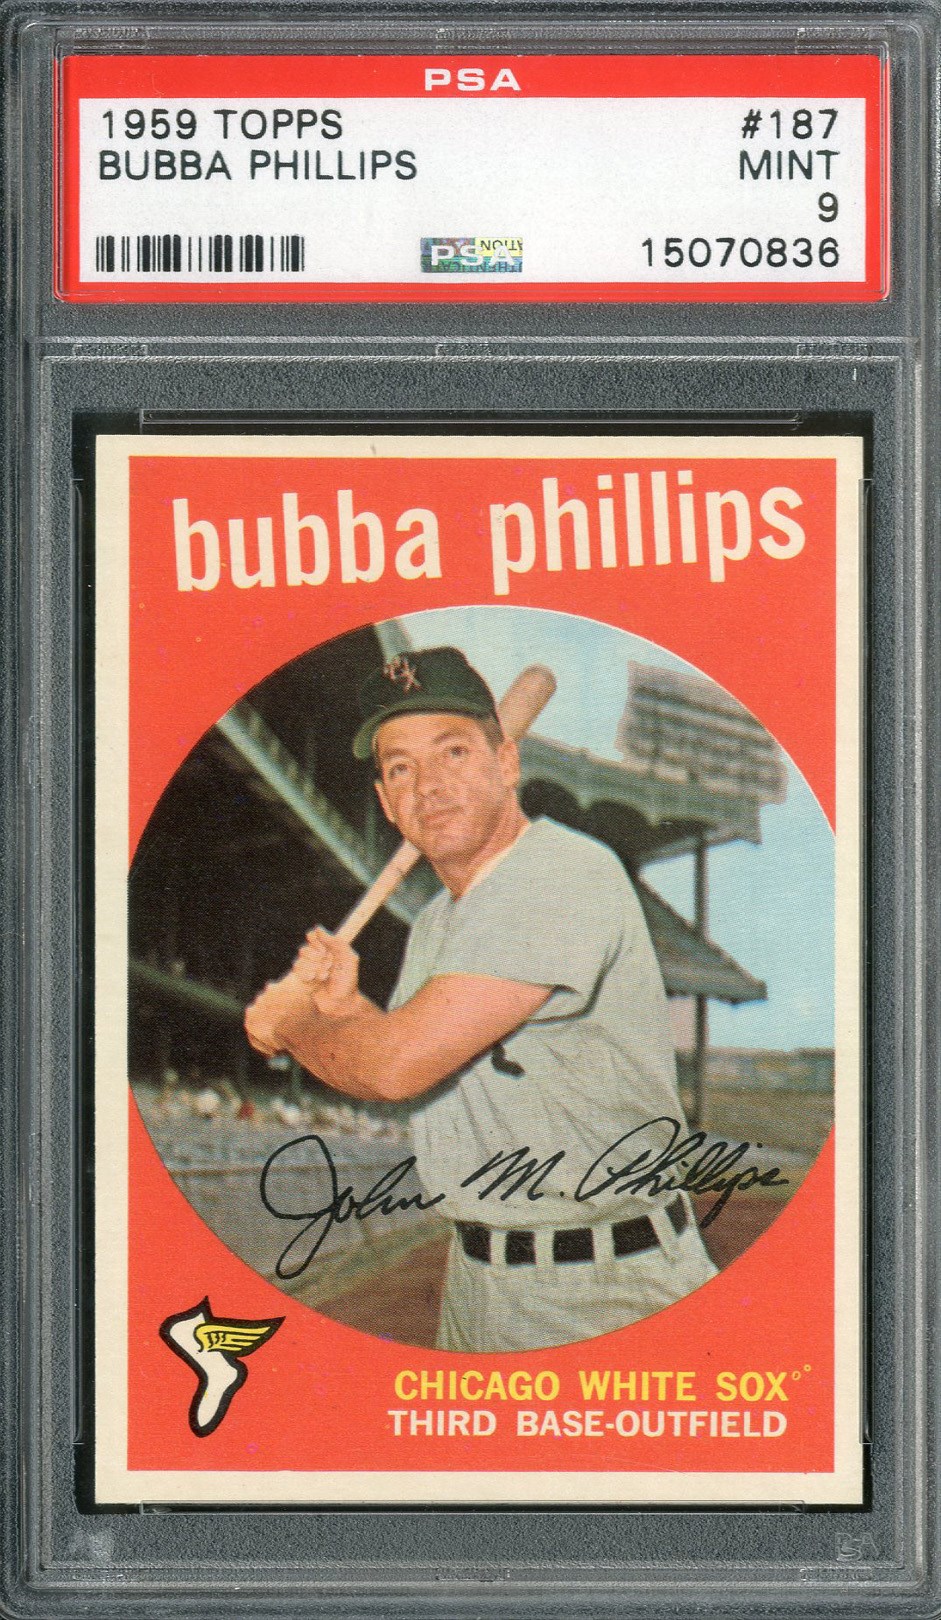 Baseball and Trading Cards - 1959 Topps #187 Bubba Phillips PSA MINT 9